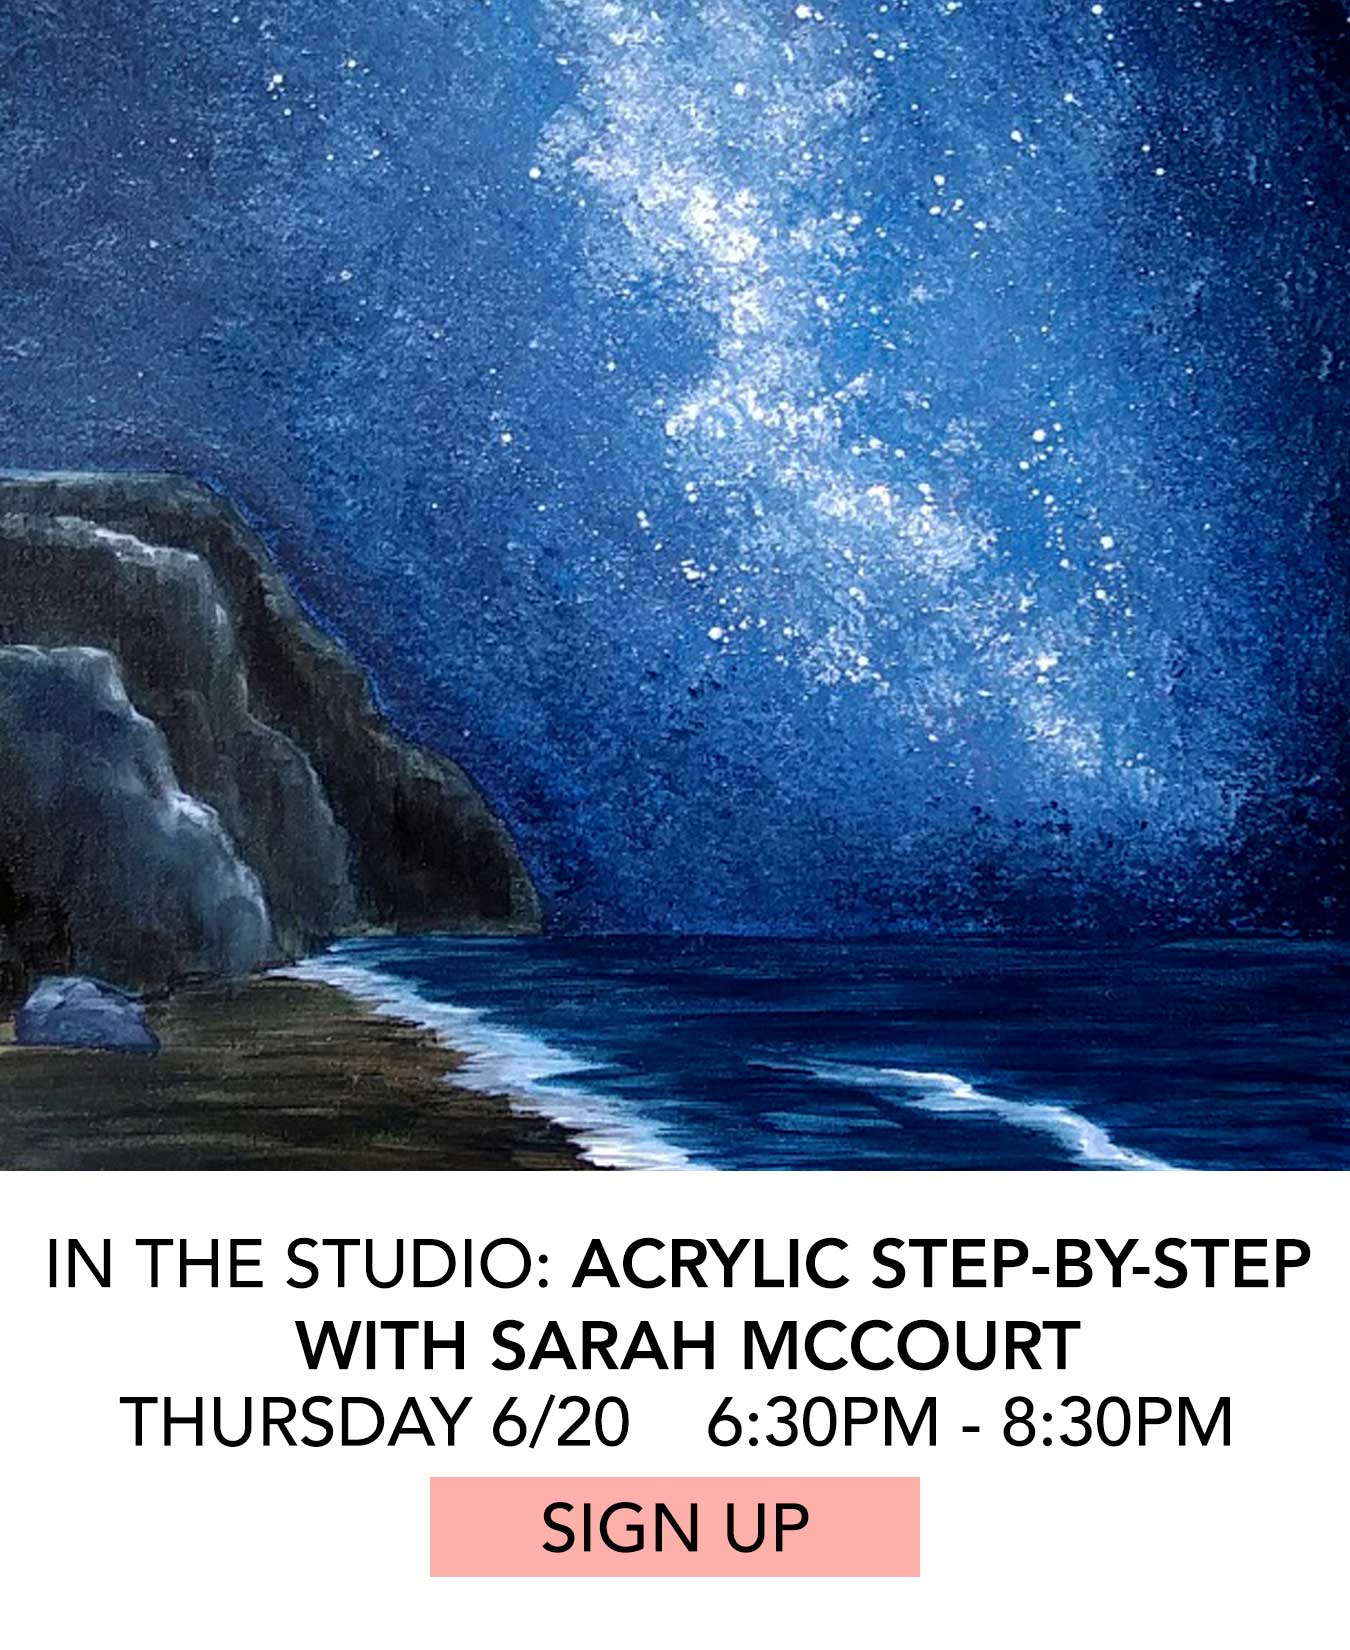 In the Studio: Acrylic Step-by-Step with Sarah McCourt. Thursday 6/20 from 6:30pm to 8:30pm. Click to Sign Up.